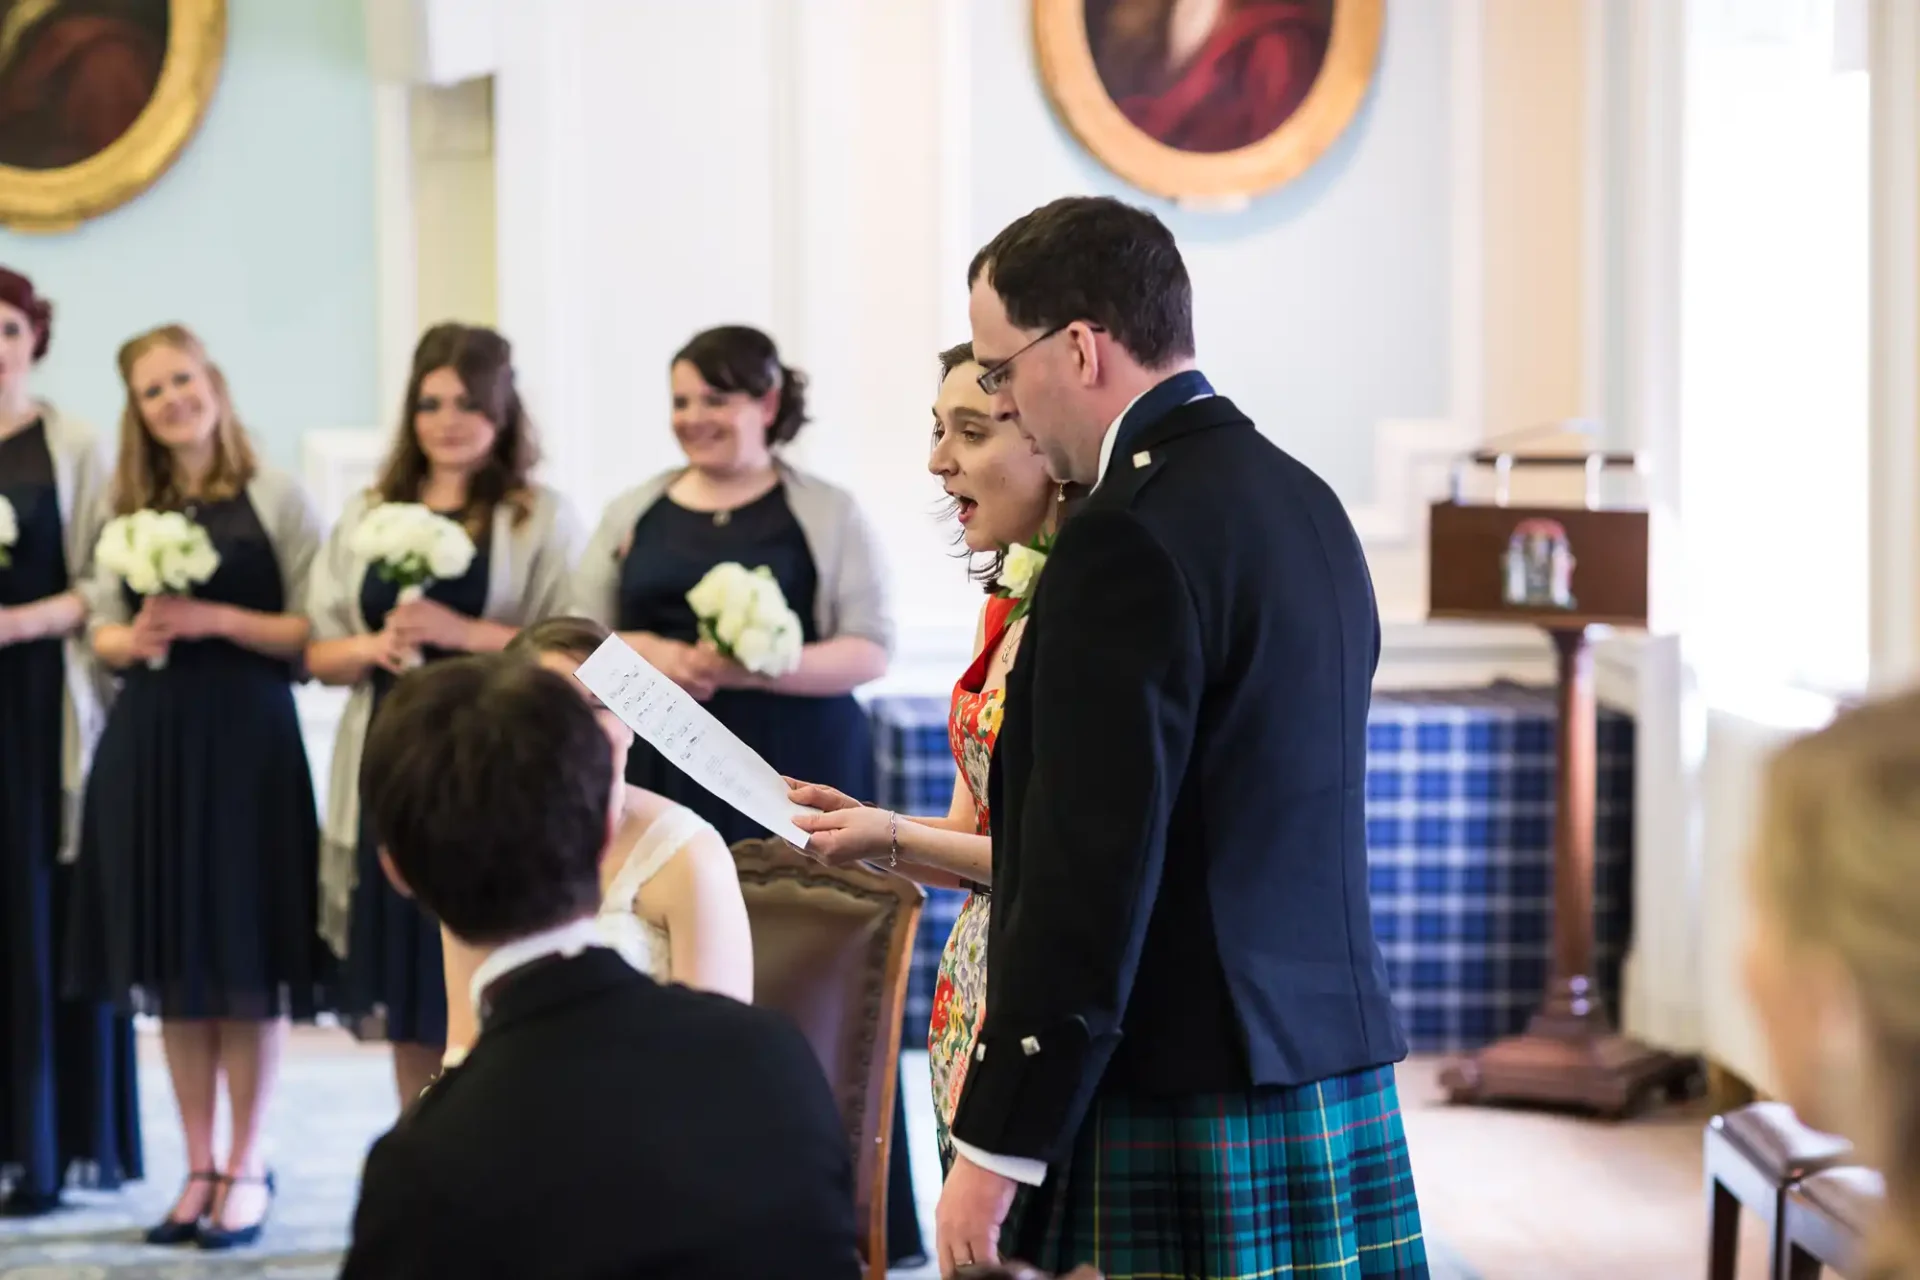 A couple reads from a paper during their wedding ceremony, standing before a small group of guests in a room with portraits on the walls.